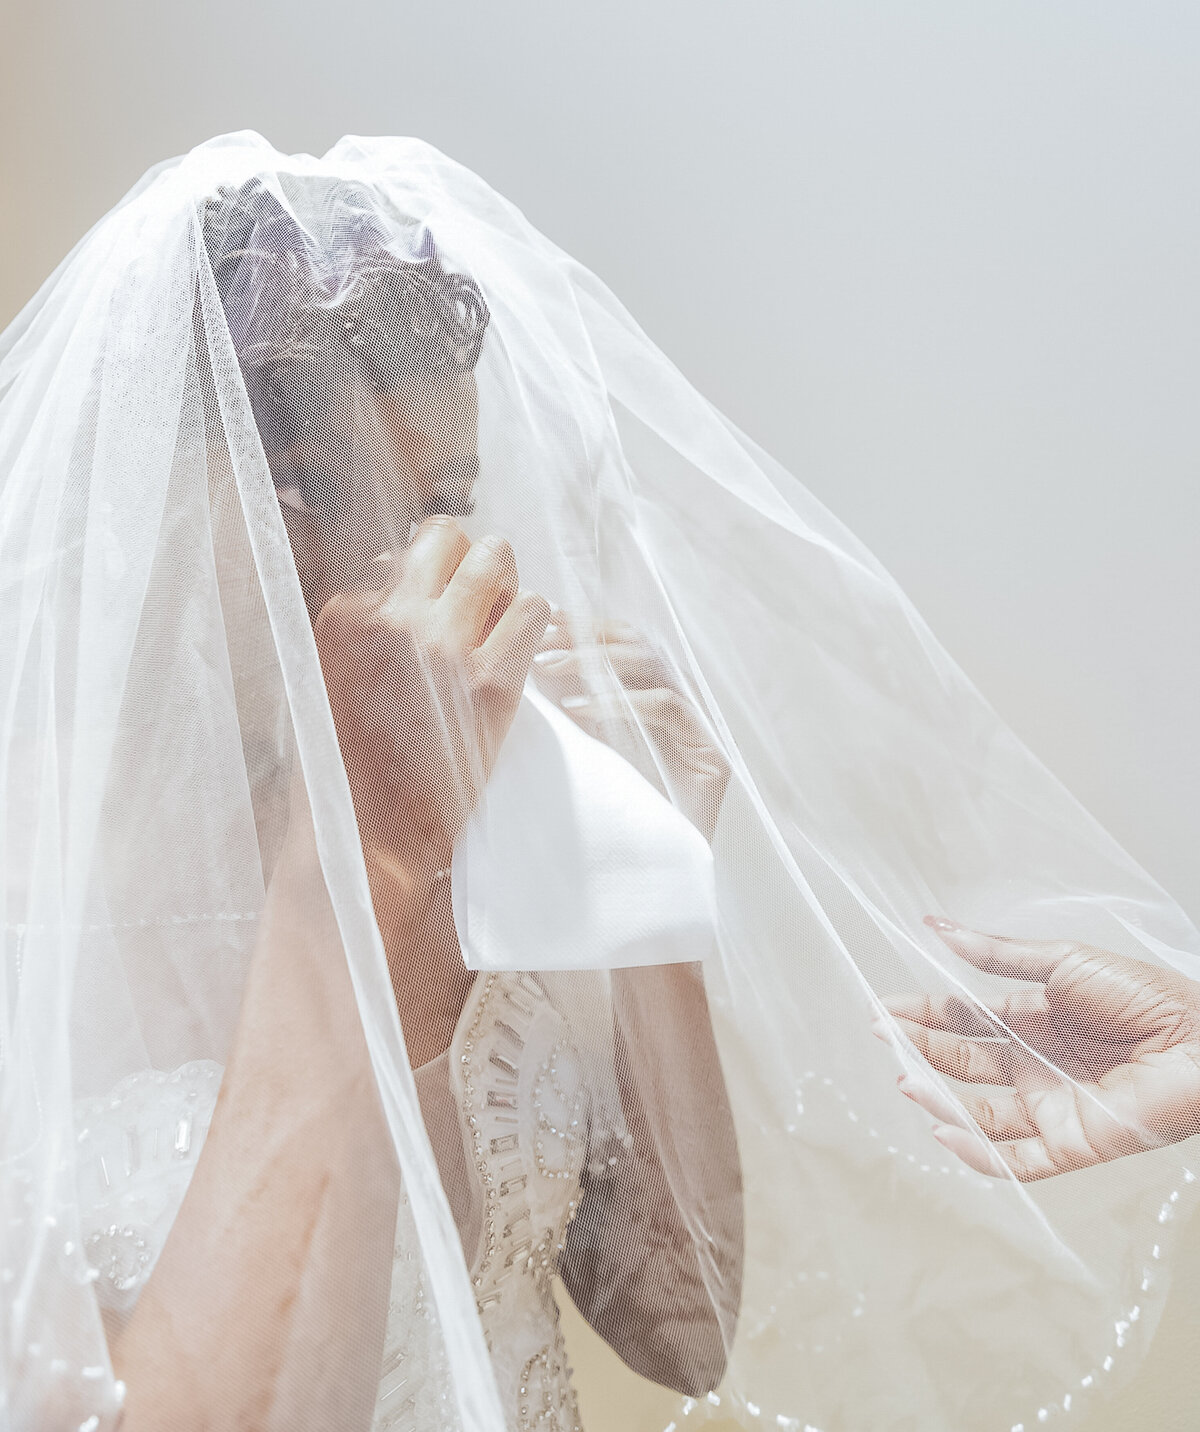 In the bridal suite on her wedding day, the bride is crying while wearing her veil.  The bridal suite has cream walls.